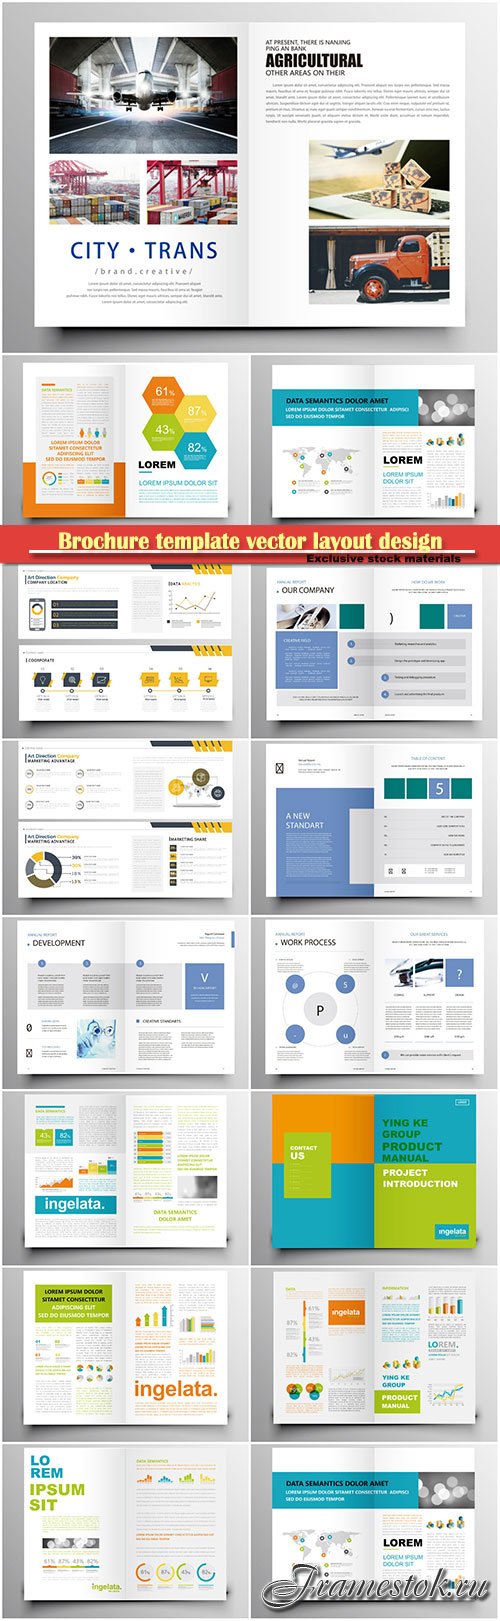 Brochure template vector layout design, corporate business annual report, magazine, flyer mockup # 133